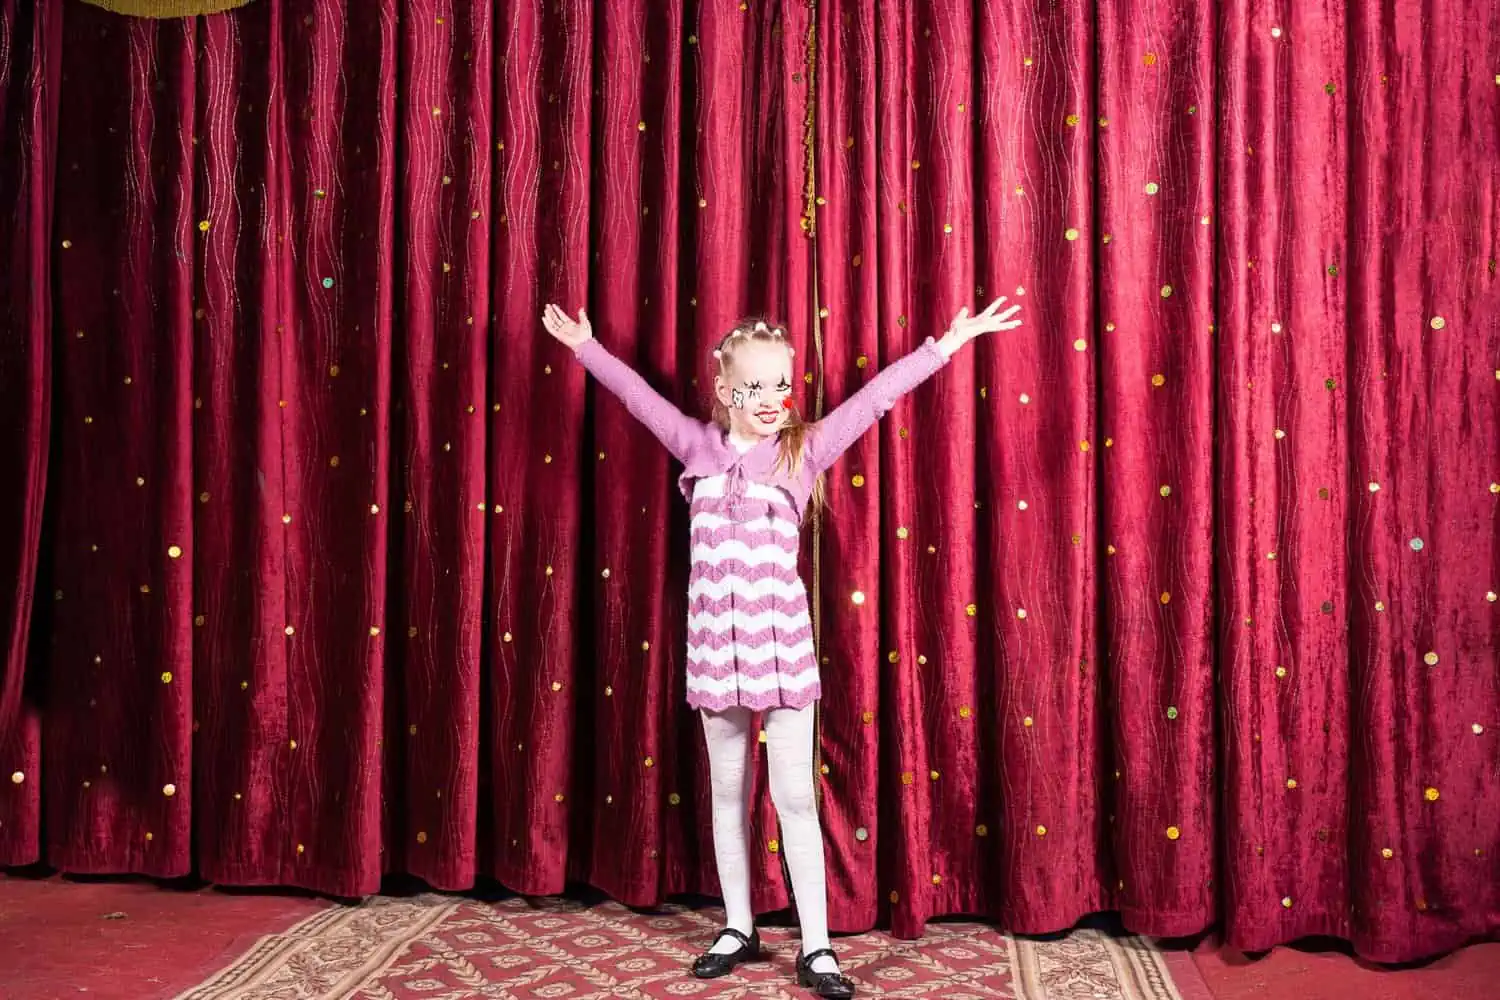 Little girl standing on stage during performance